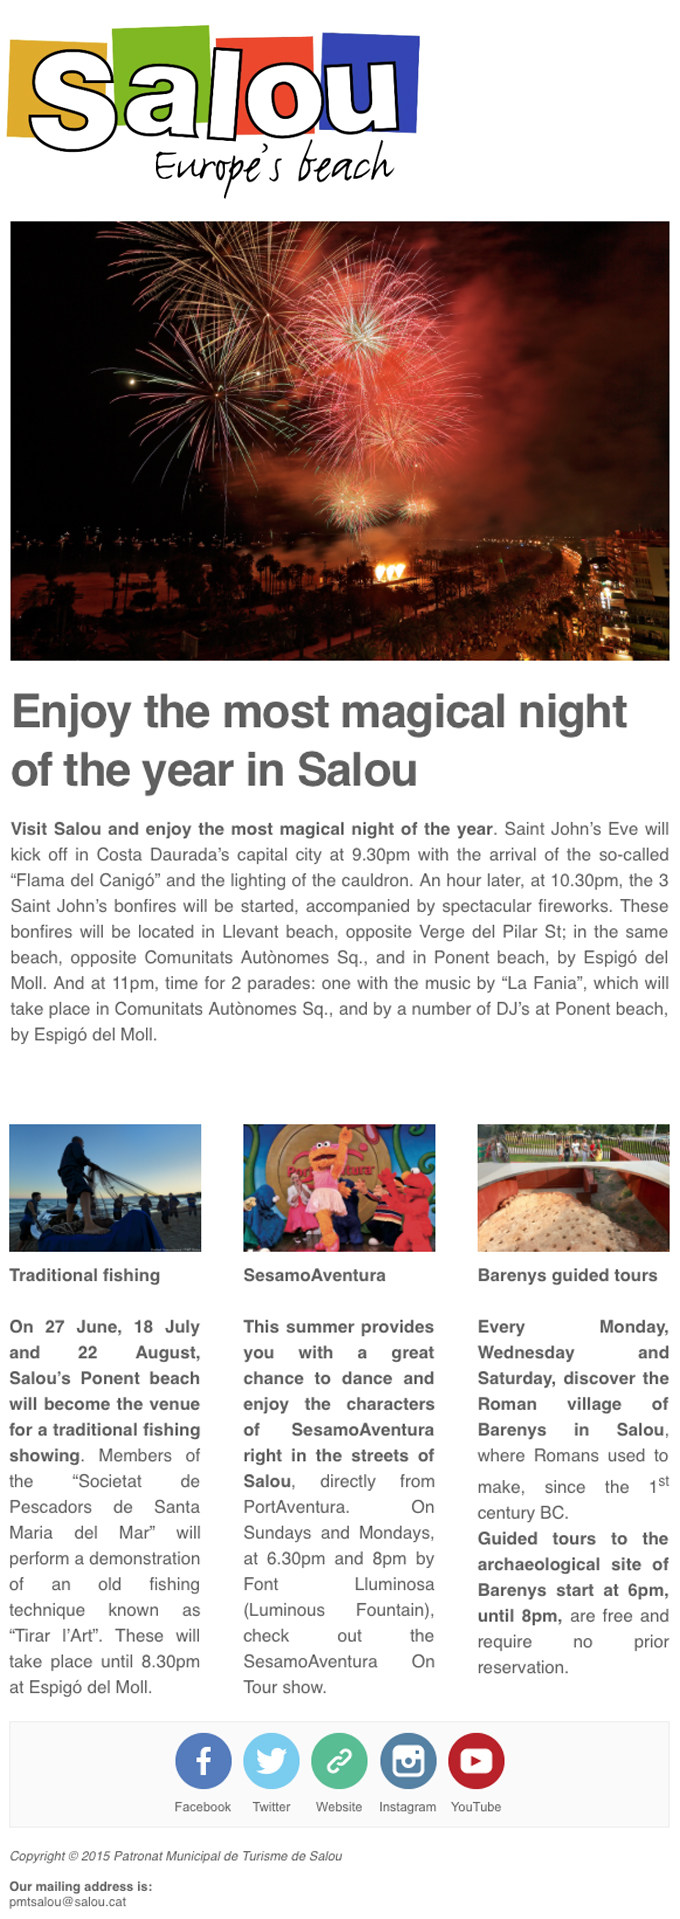 Enjoy the most magical night of the year in Salou